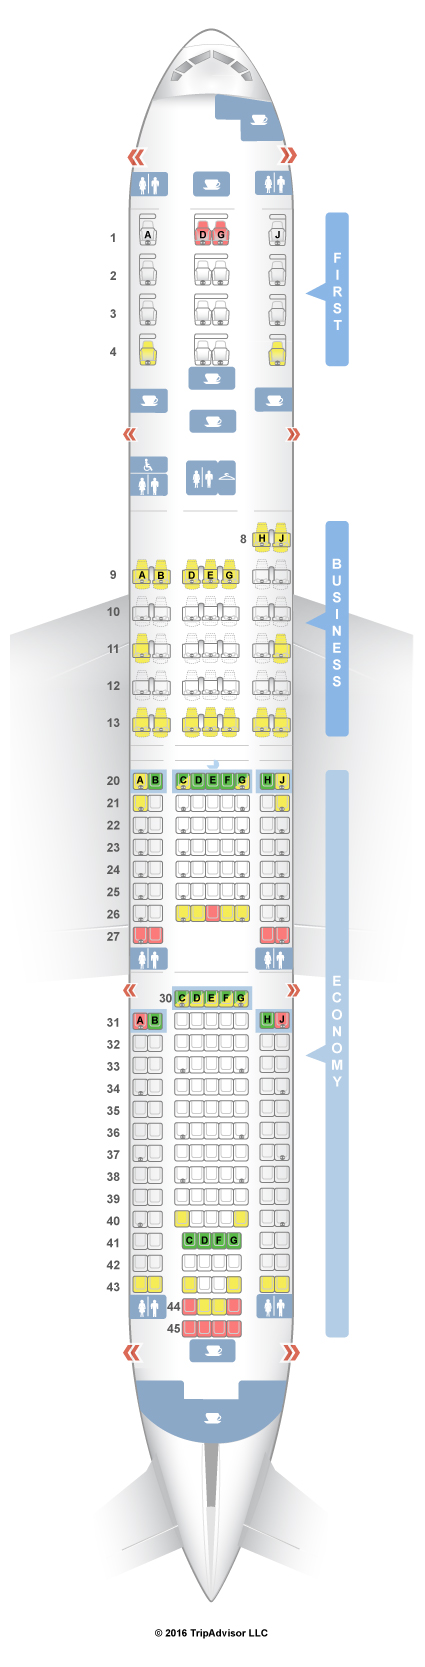 american airlines seat map boeing 777 200